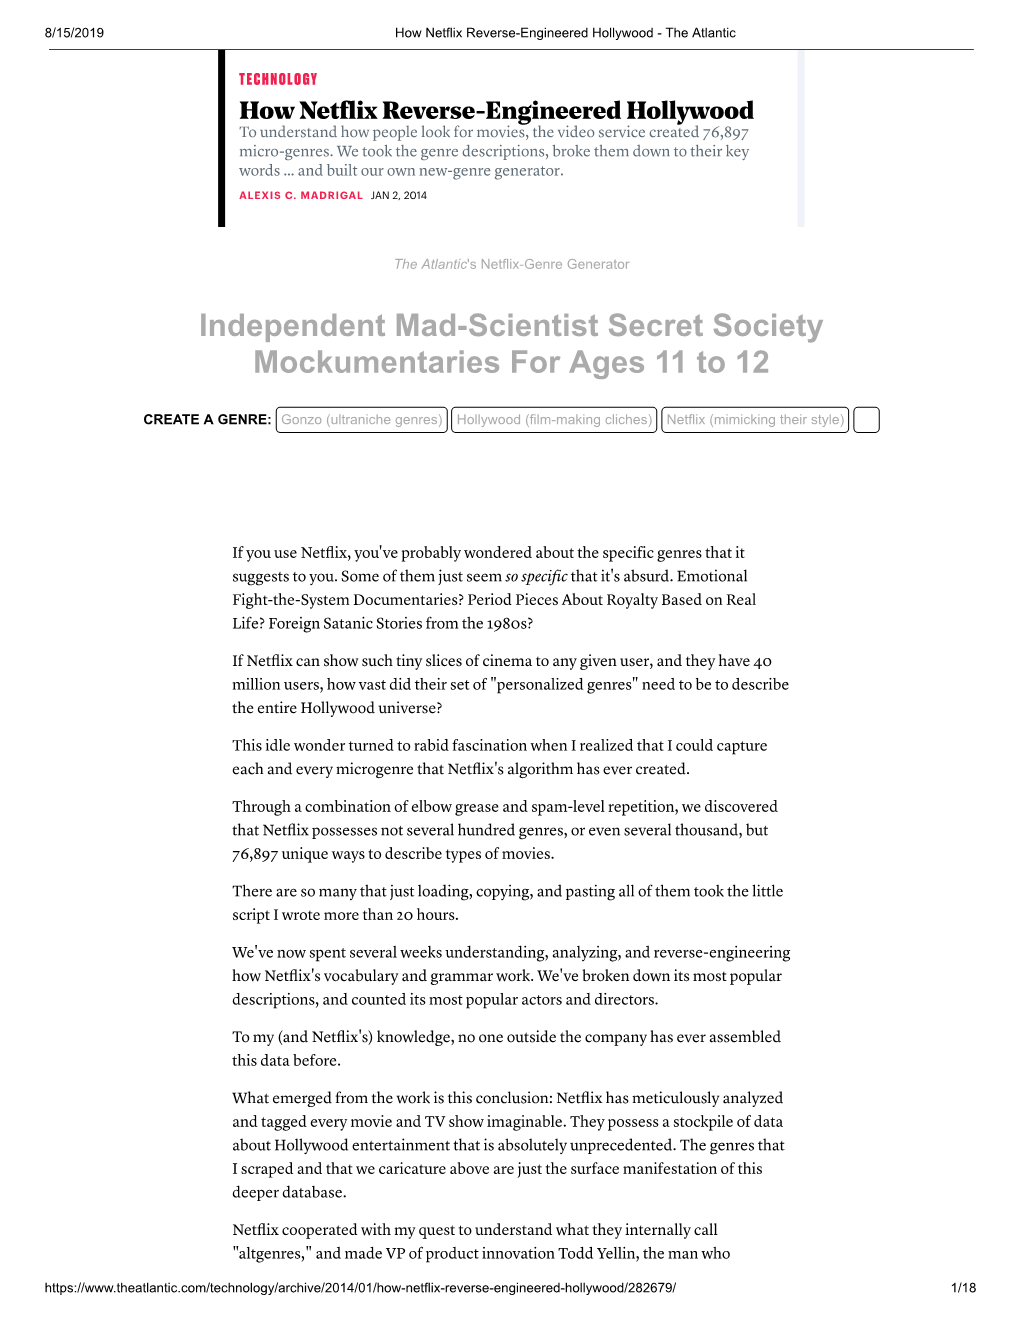 Independent Mad-Scientist Secret Society Mockumentaries for Ages 11 to 12